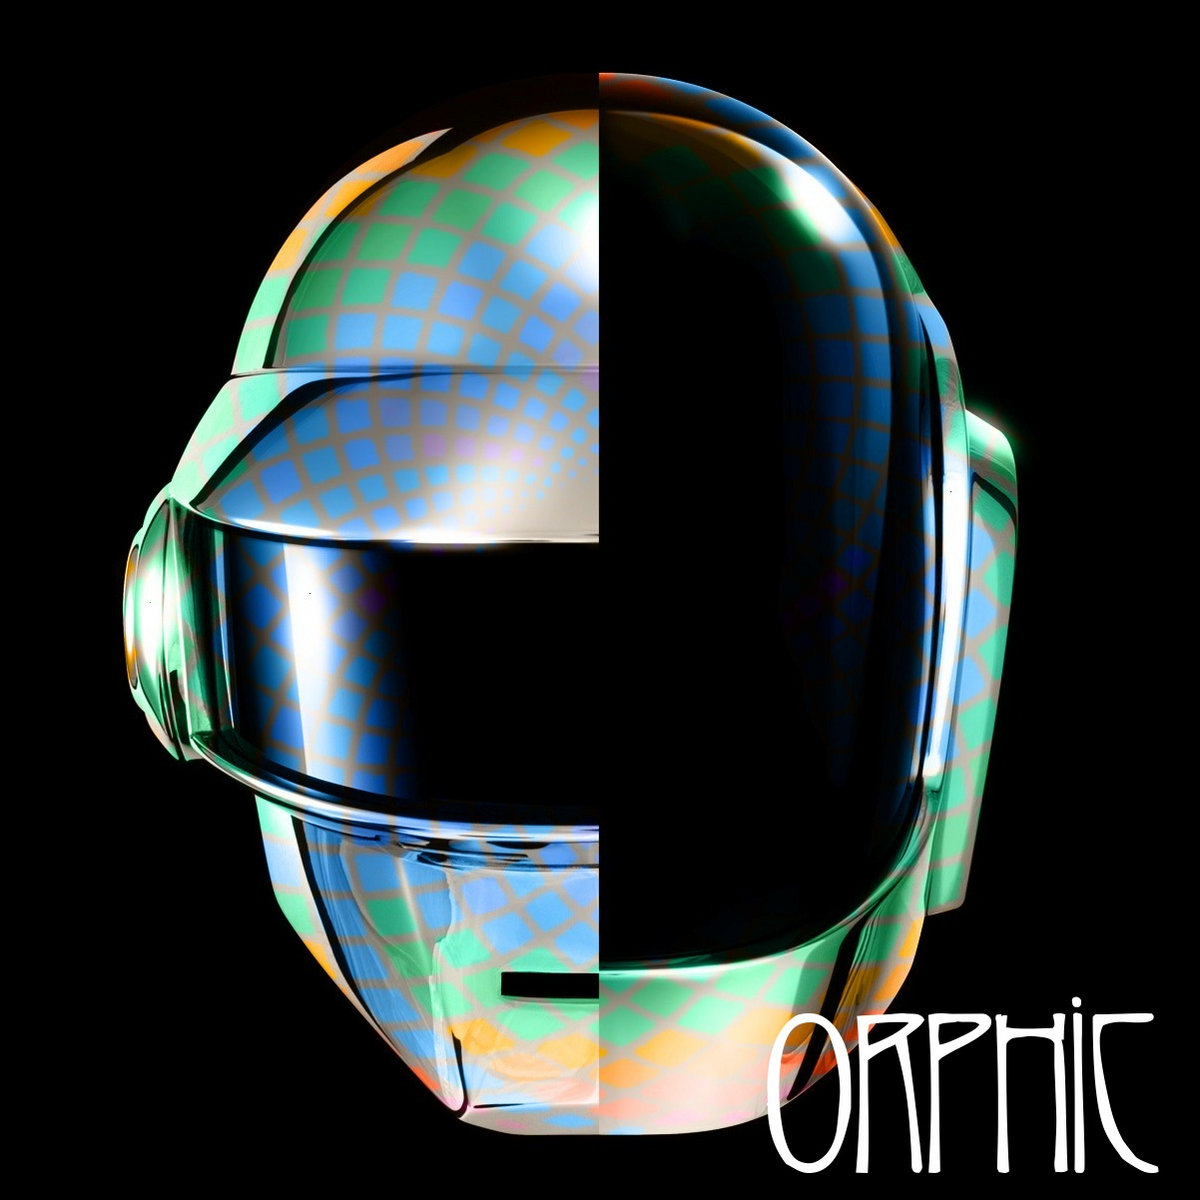 daft punk giorgio by moroder mp3 download